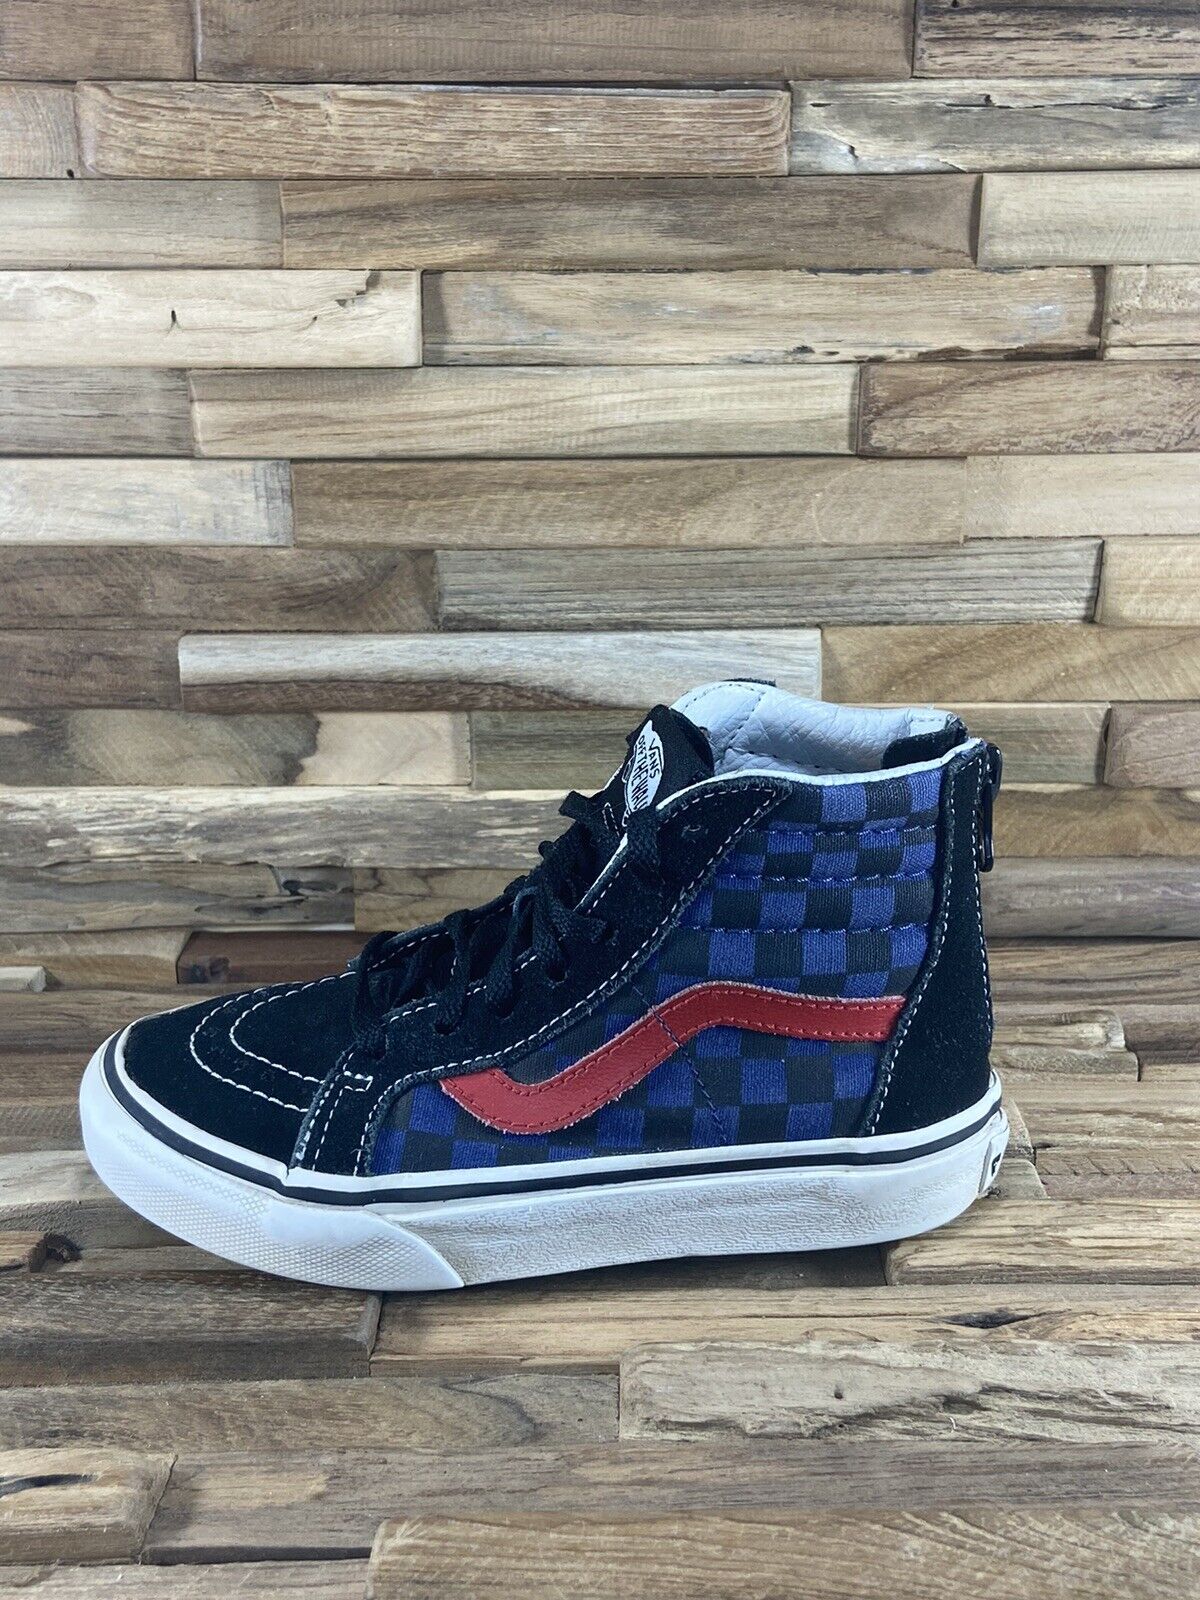 Vans Off The Wall Sk8 お待たせ! Shoes 再入荷 Checkered Top Blue High Bla Sneakers